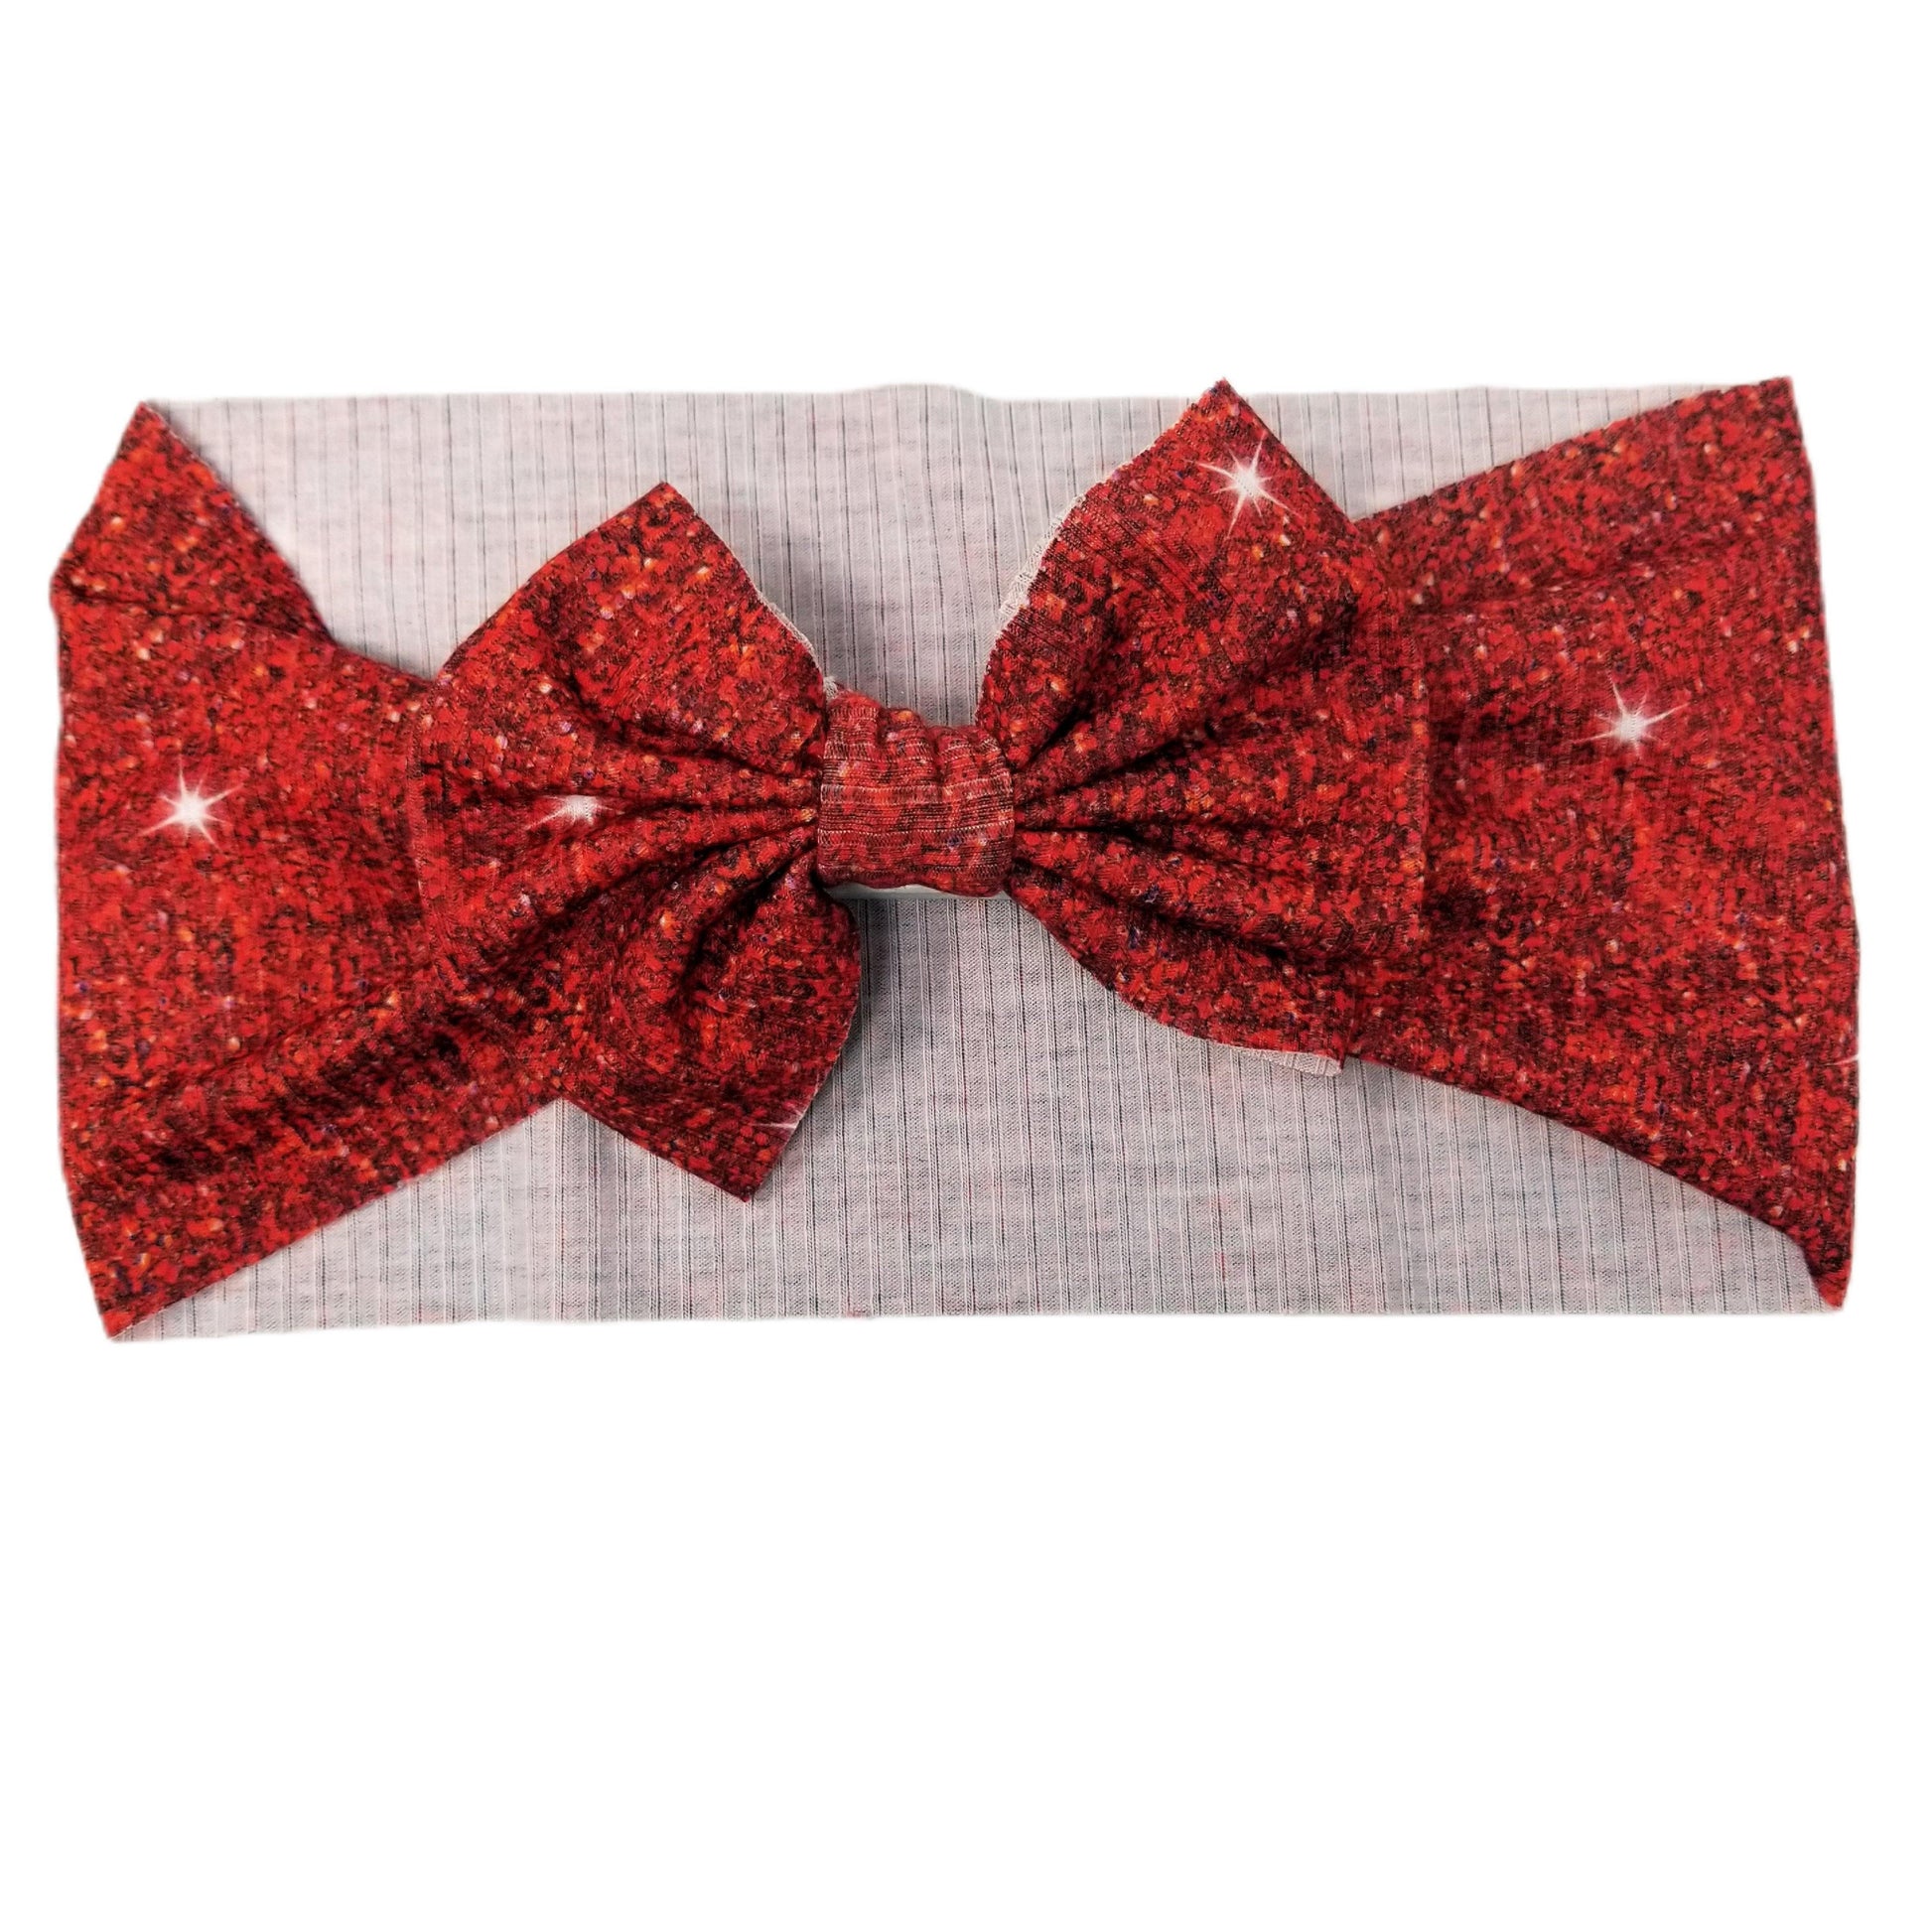 5 inch Red Faux Glitter Fabric Bow Headwrap